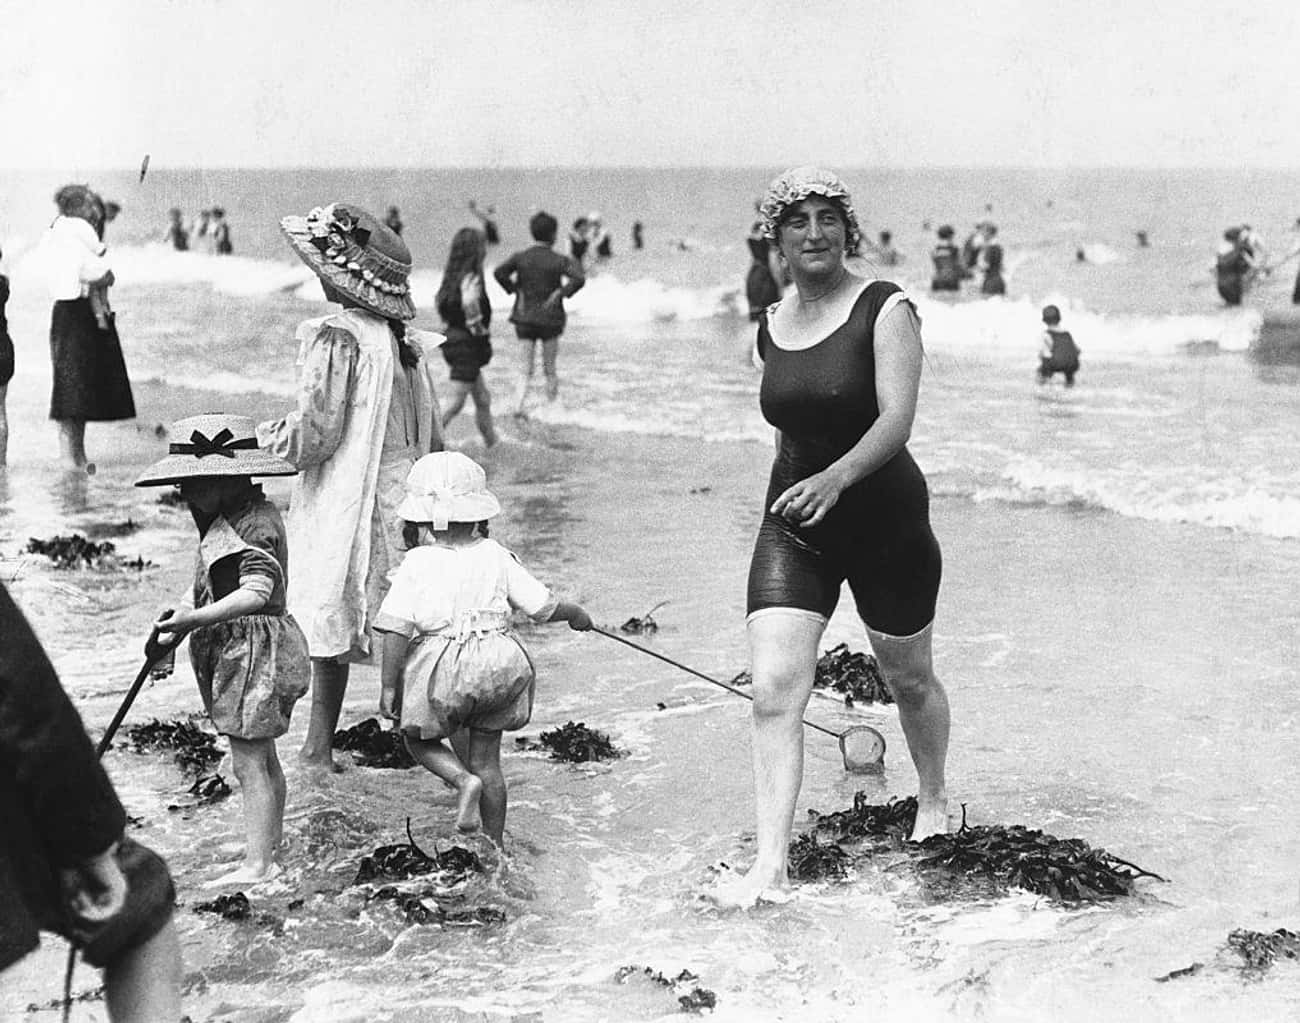 Bathers At Margate, 1913